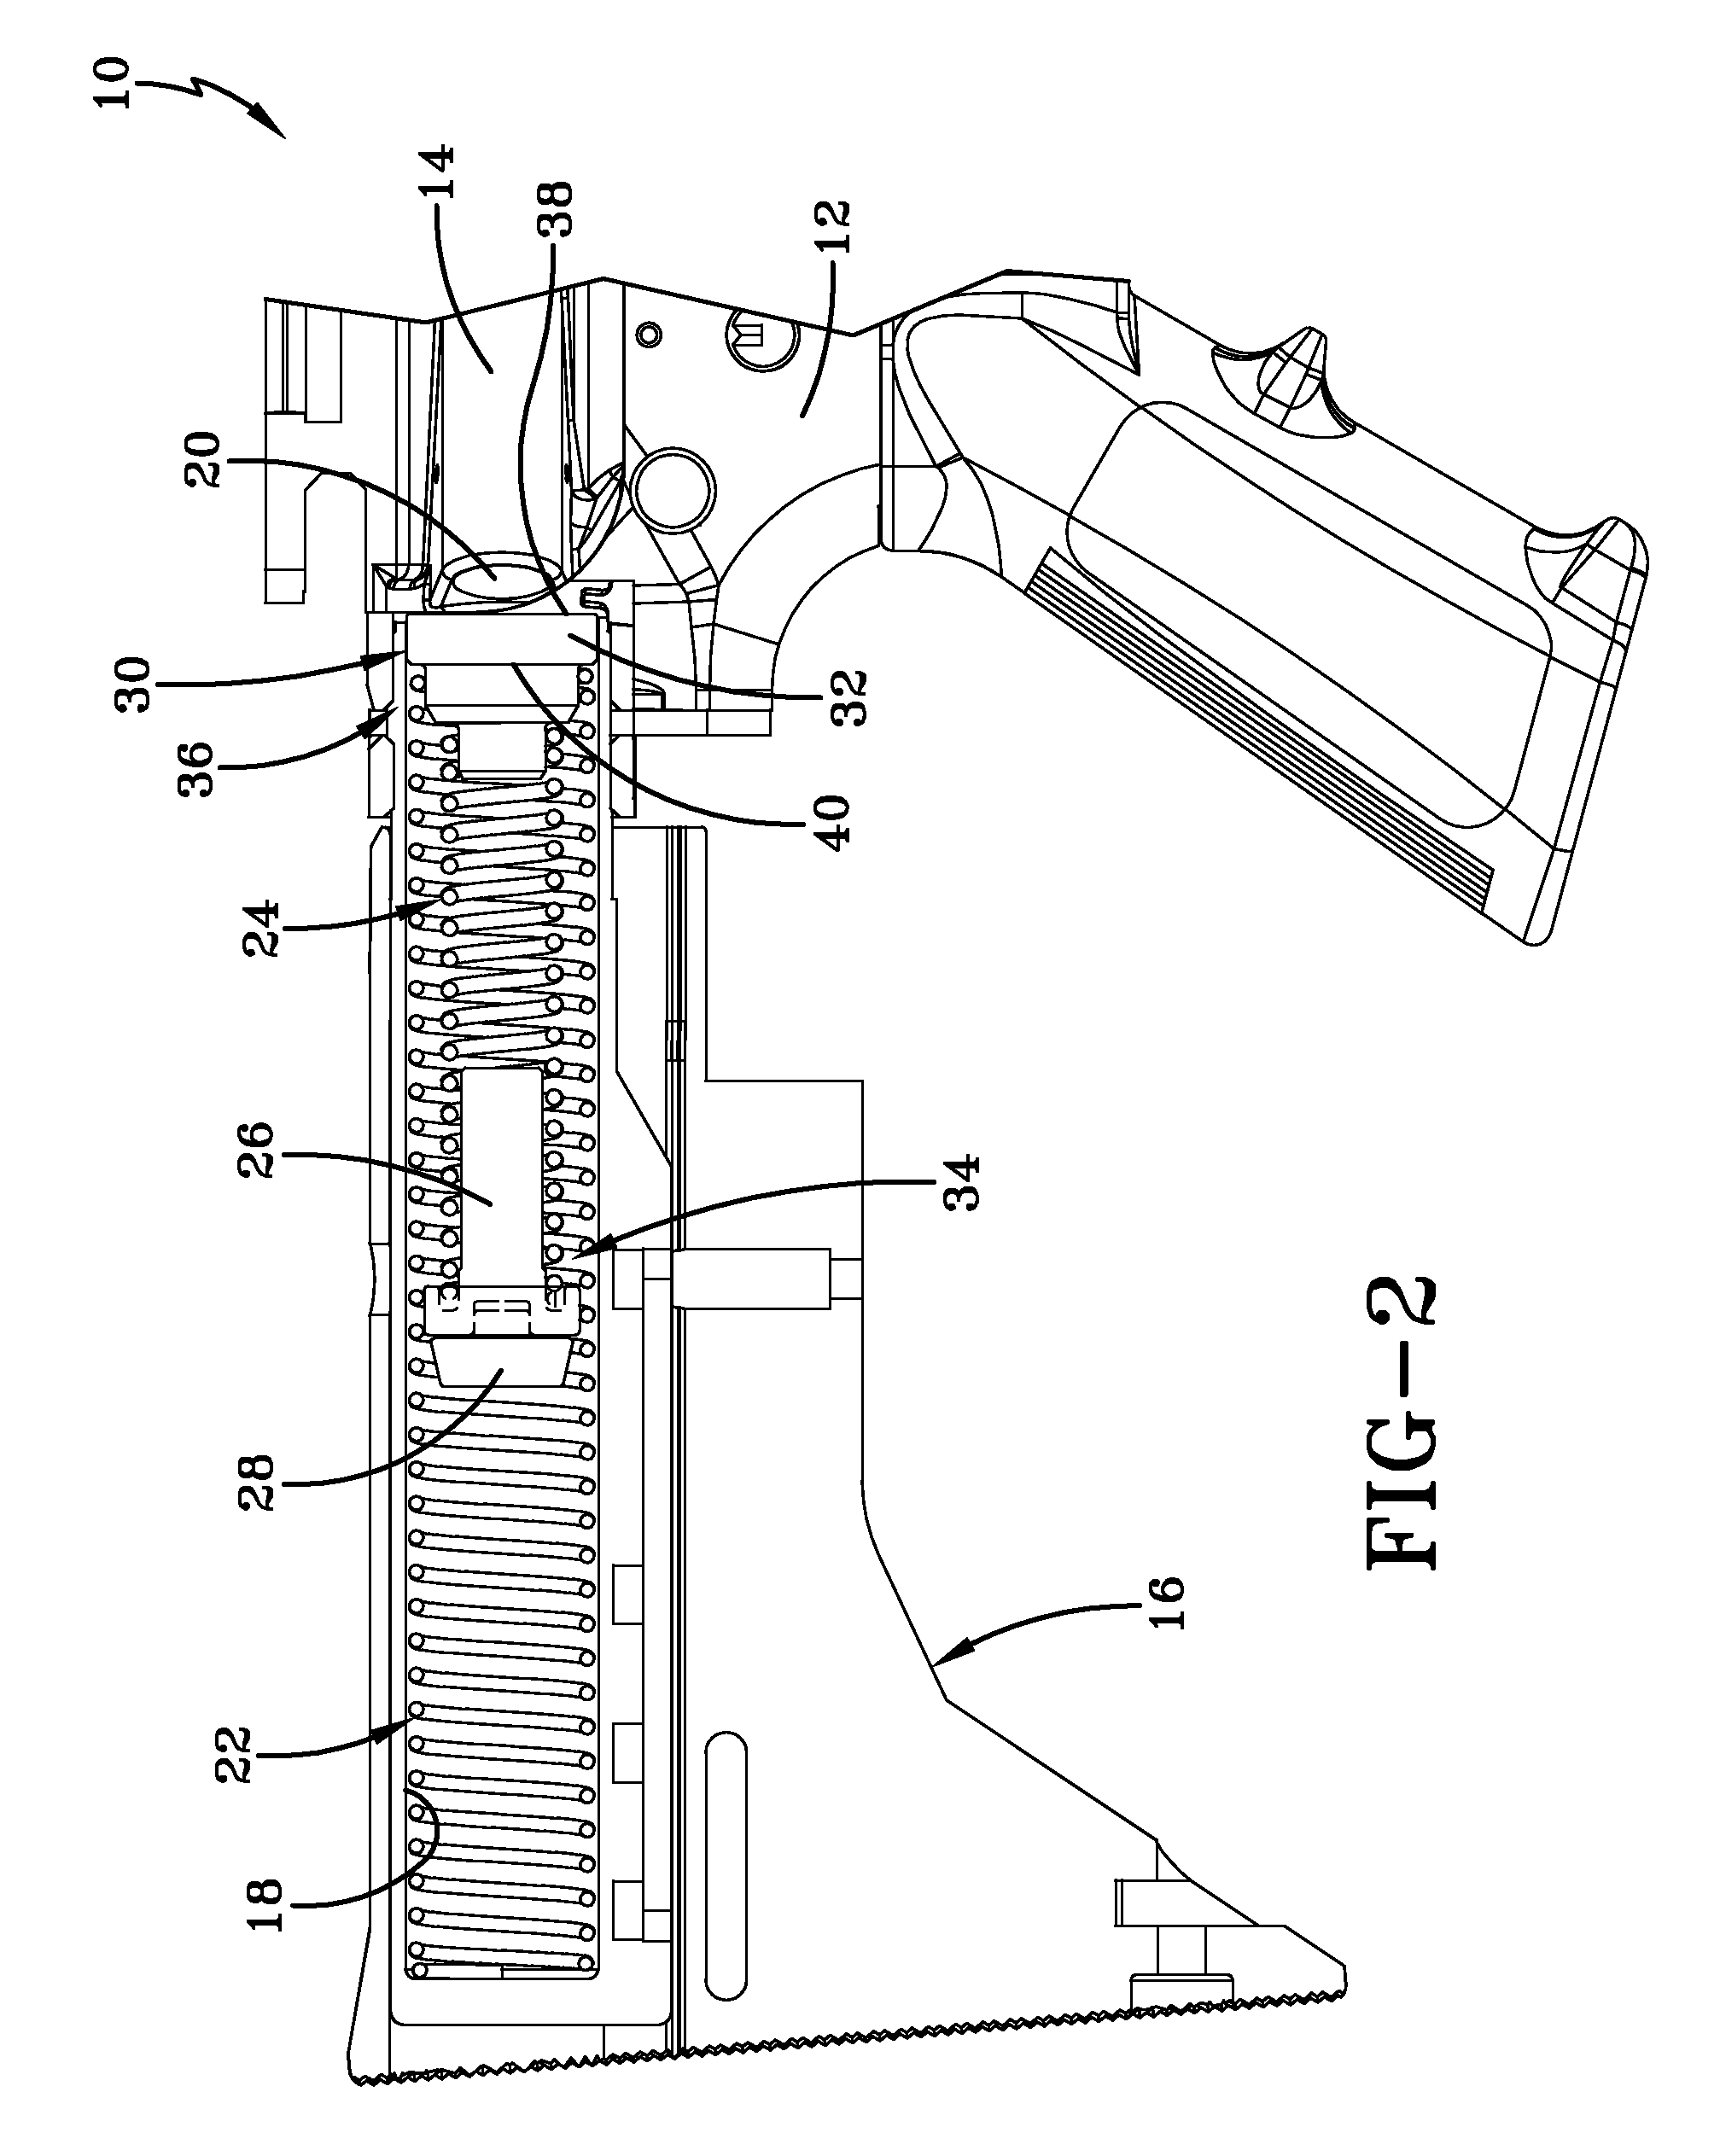 Mechanical buffer for shouldered weapon